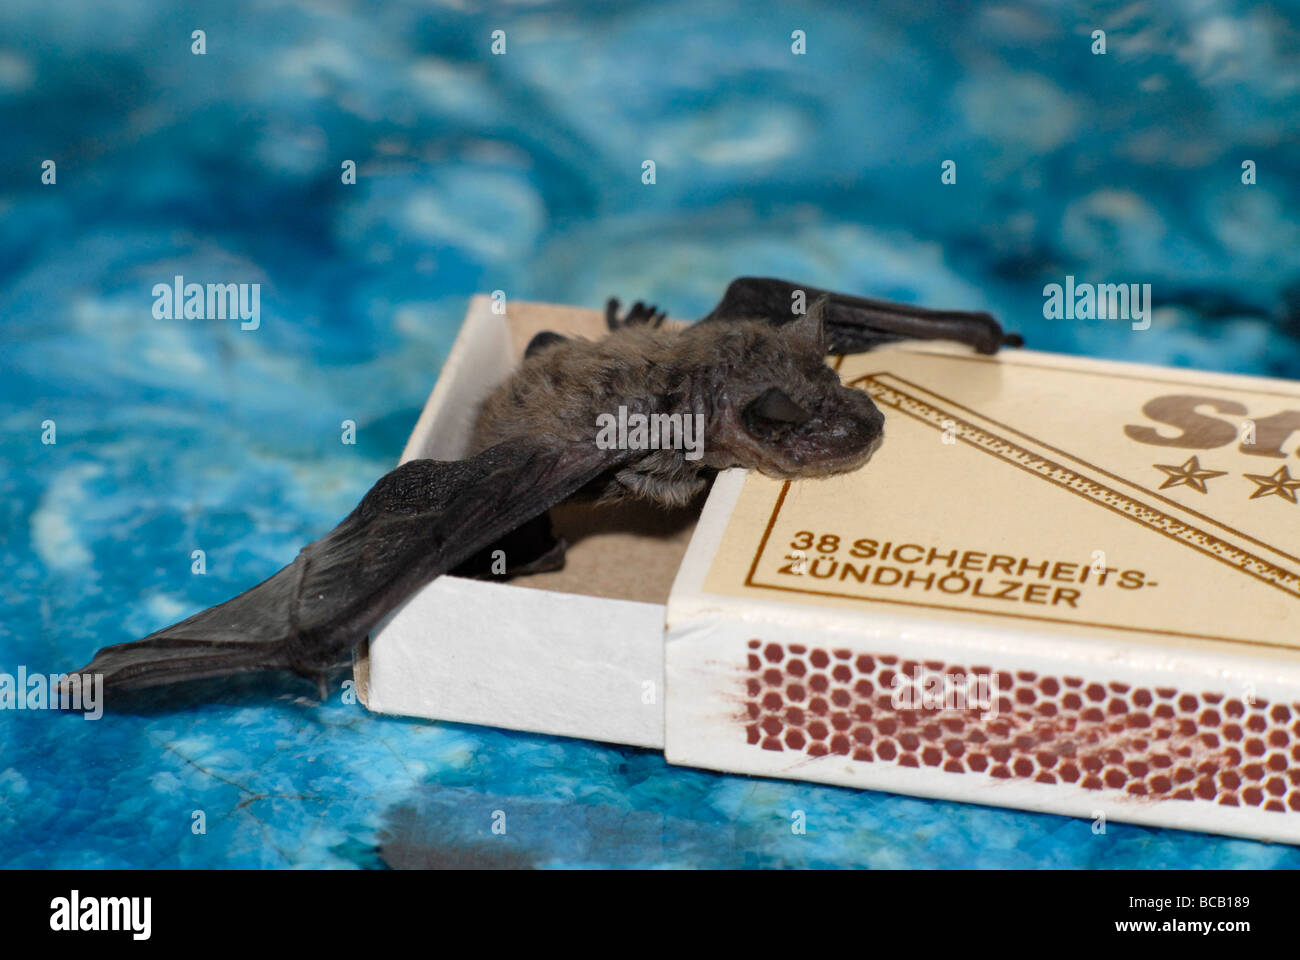 A bat (common pipistrelle), about 3 weeks old, sitting on a box of matches Stock Photo